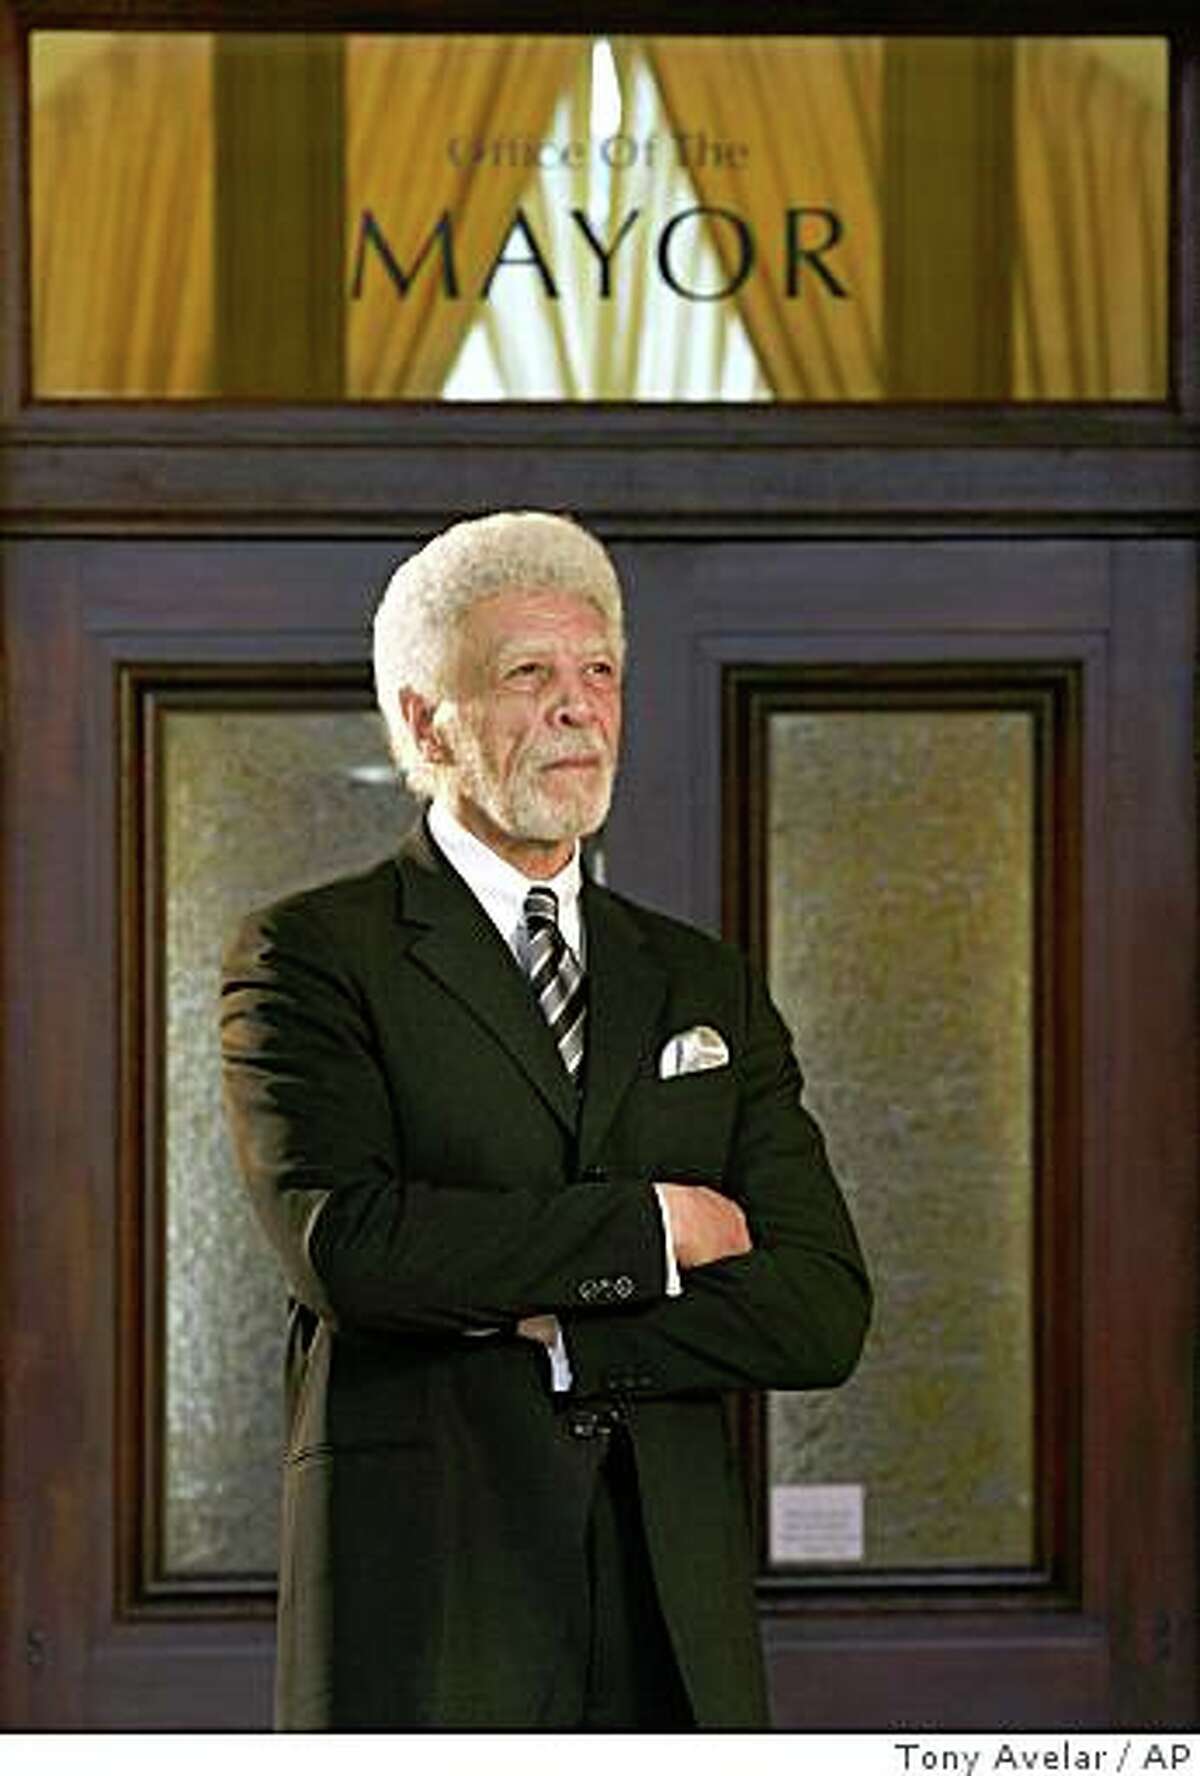 **FILE** In this Tuesday, March 18, 2008, file photo, Oakland Mayor Ron Dellums poses outside his office at City Hall in Oakland, Calif. Dellums is being awarded a prestigious South African government honor on Tuesday, April 22, 2008 for leading the struggle in Congress for the economic sanctions that helped end South African apartheid. (AP Photo/Tony Avelar)